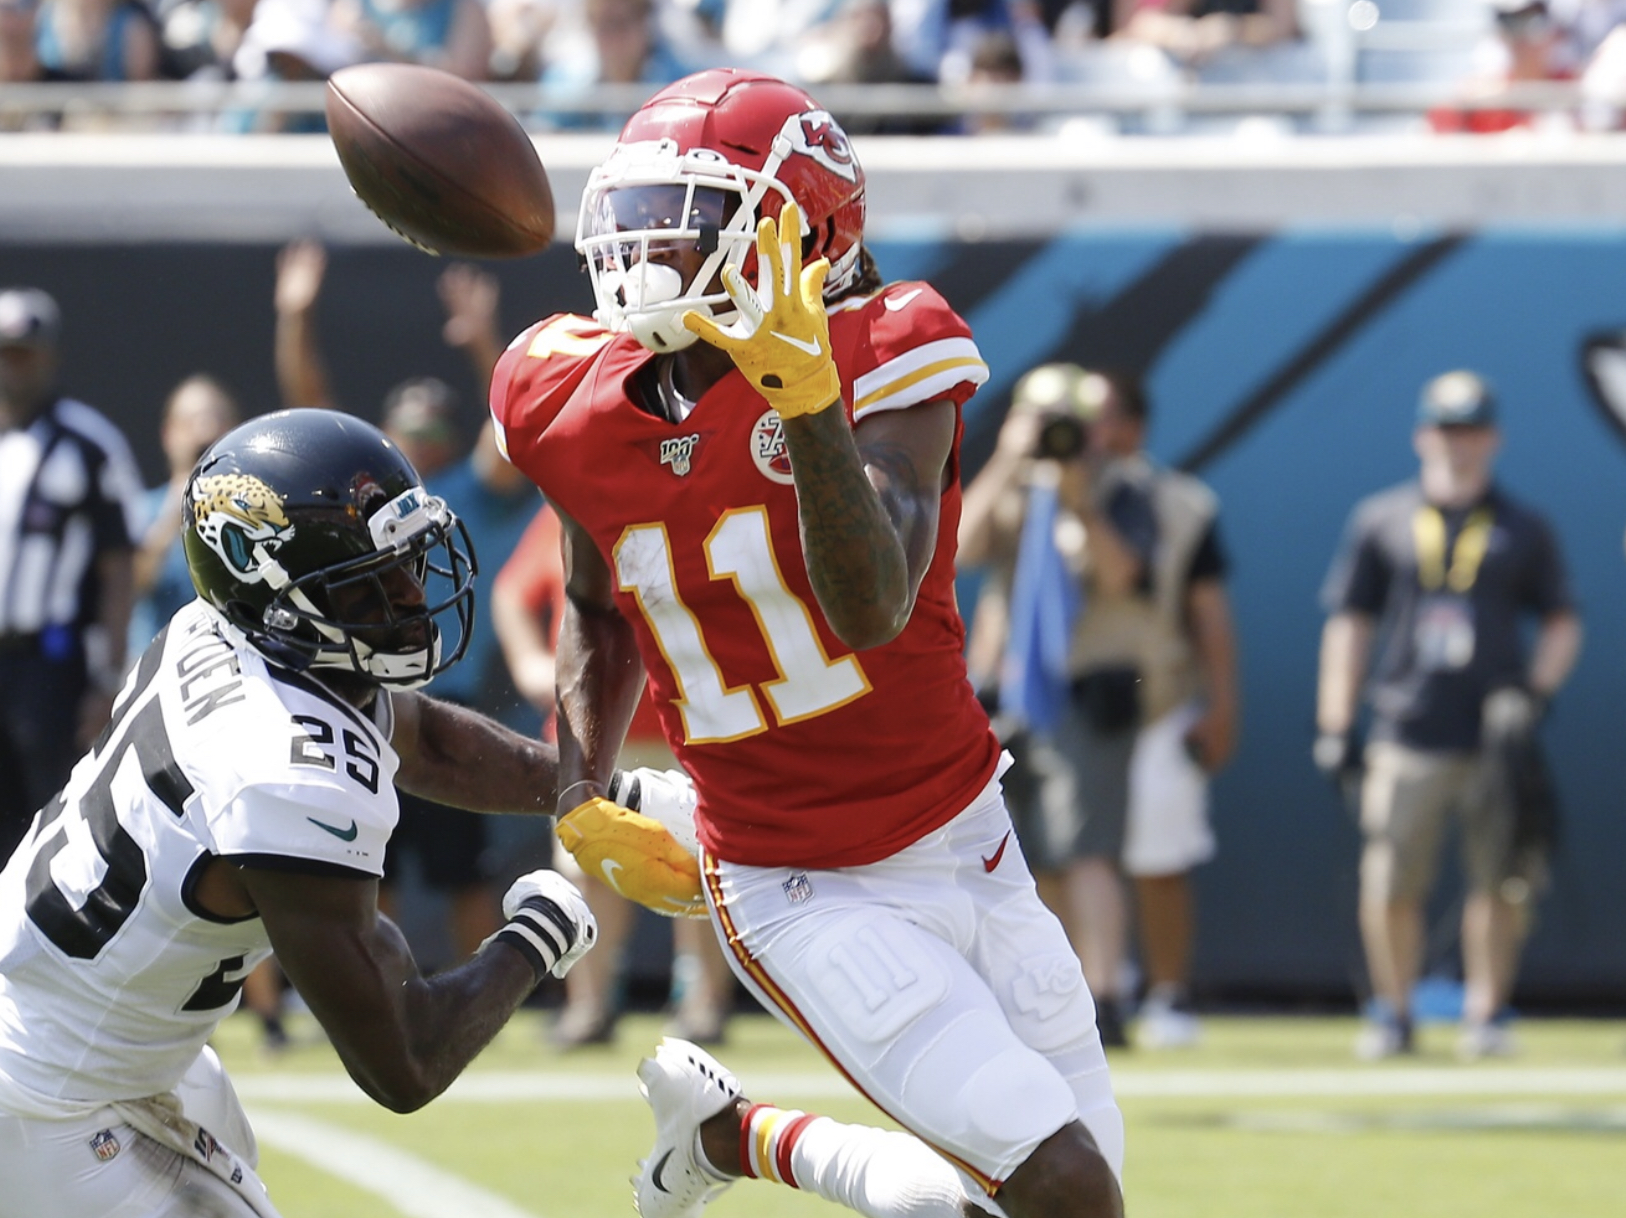 WATCH: Chiefs’ Demarcus Robinson with great TD catch